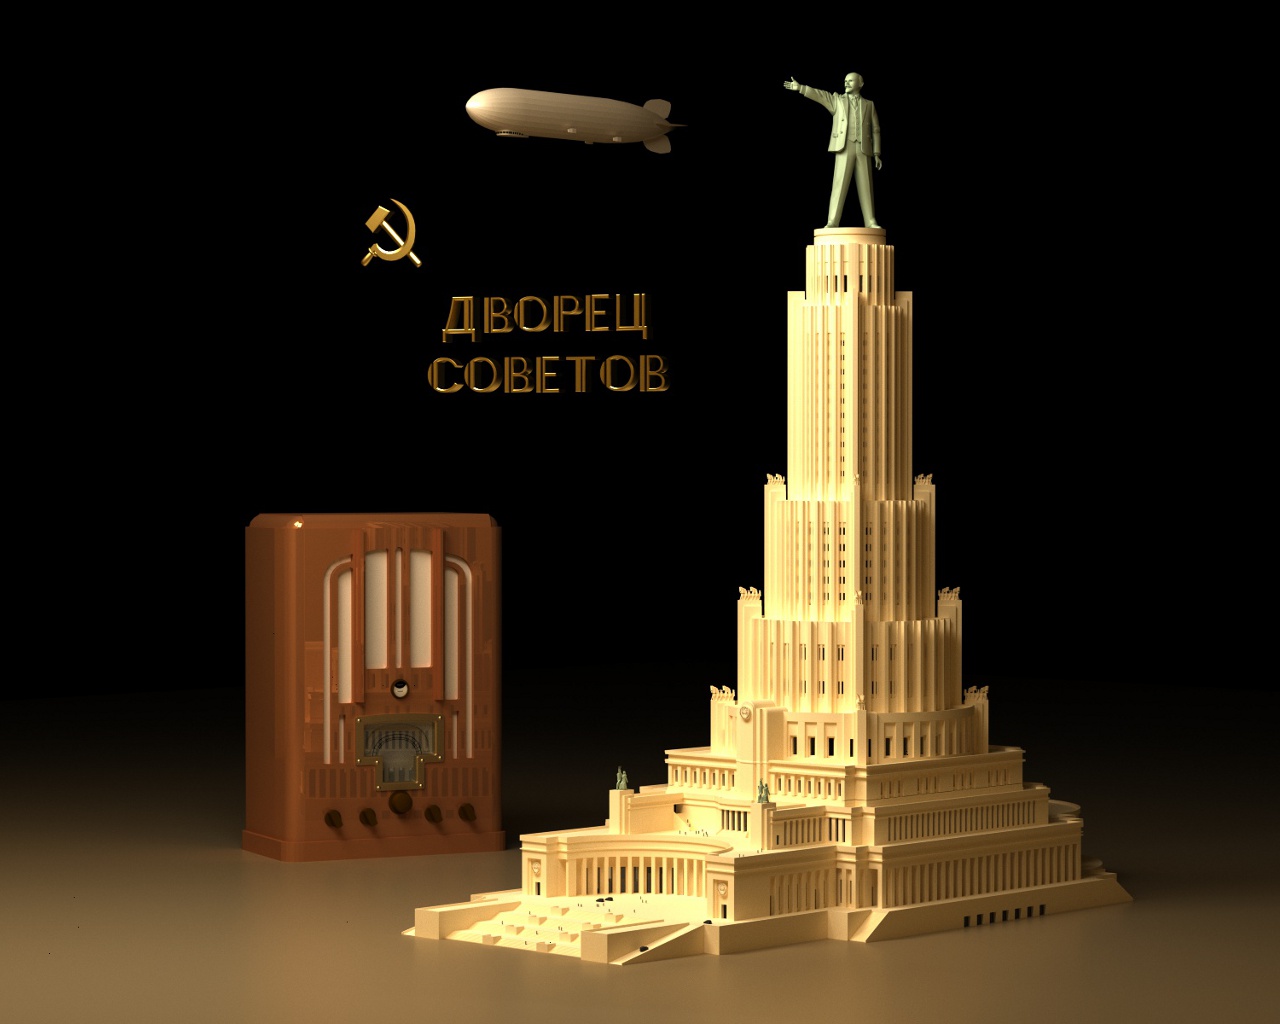 Palace of the Soviets